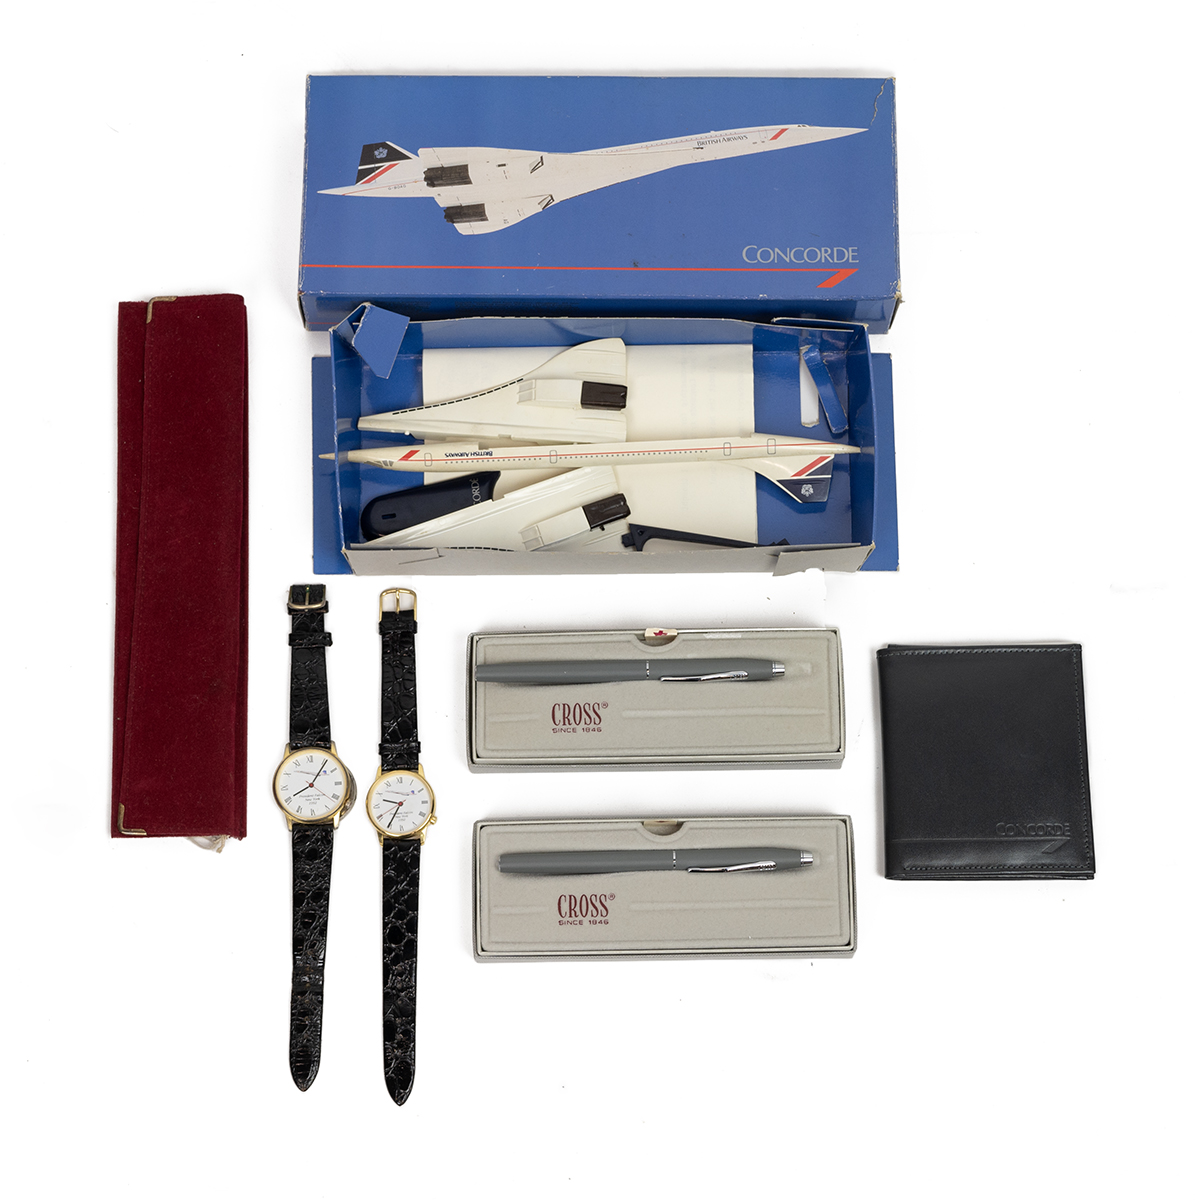 Concorde memorabilia to include a leather credit card wallet, a Wooster model Concorde (boxed), t...